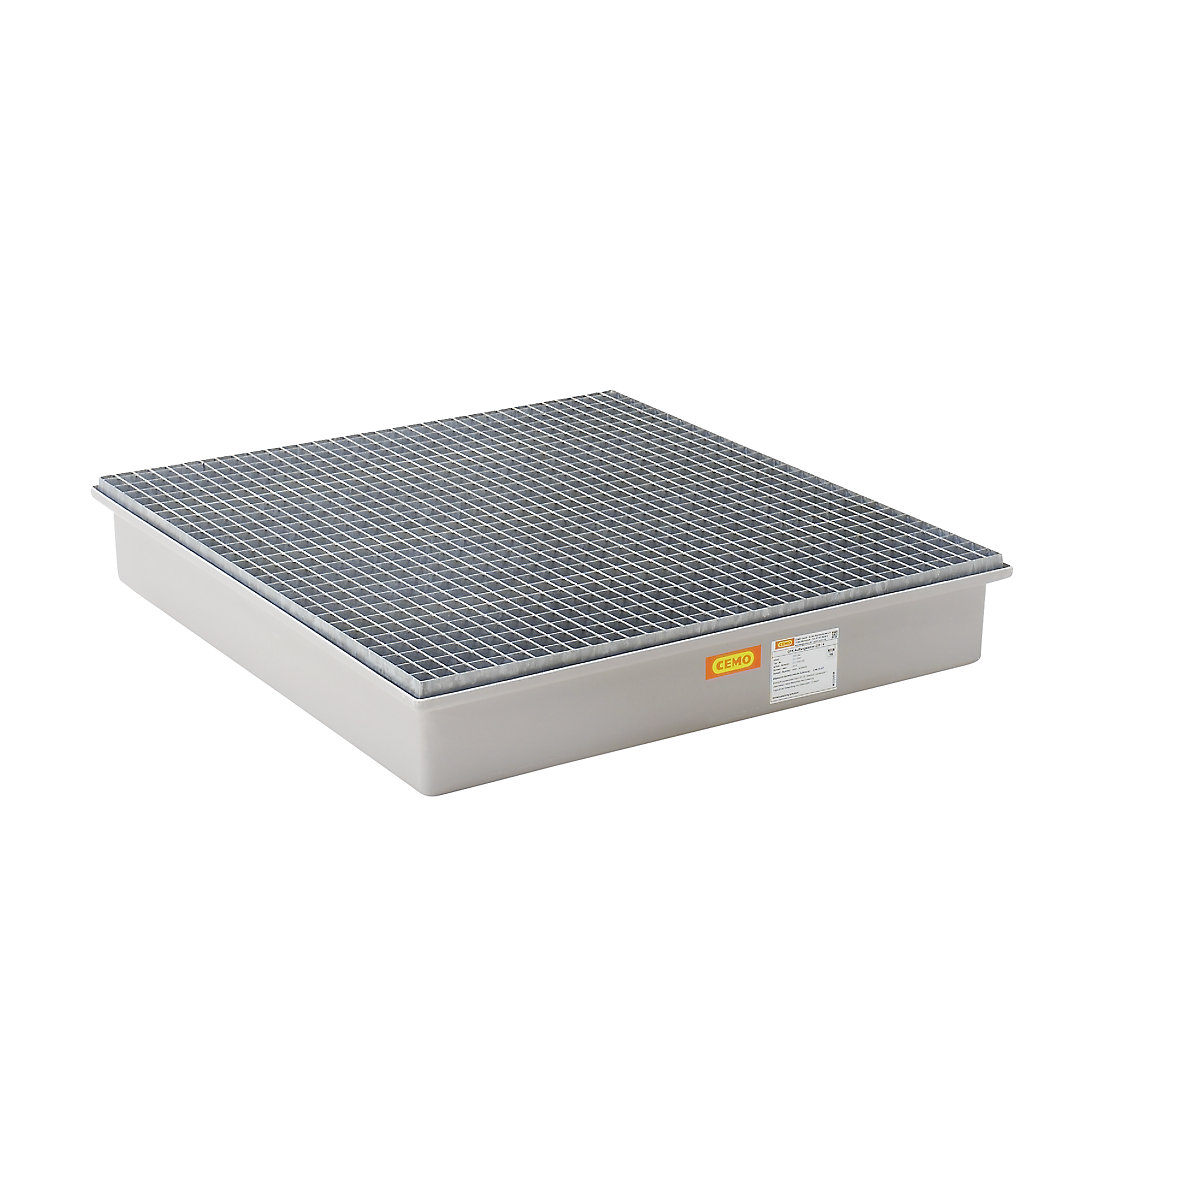 GRP base sump tray – CEMO, 4 x 200 litre drums, with certification, with steel grate-5